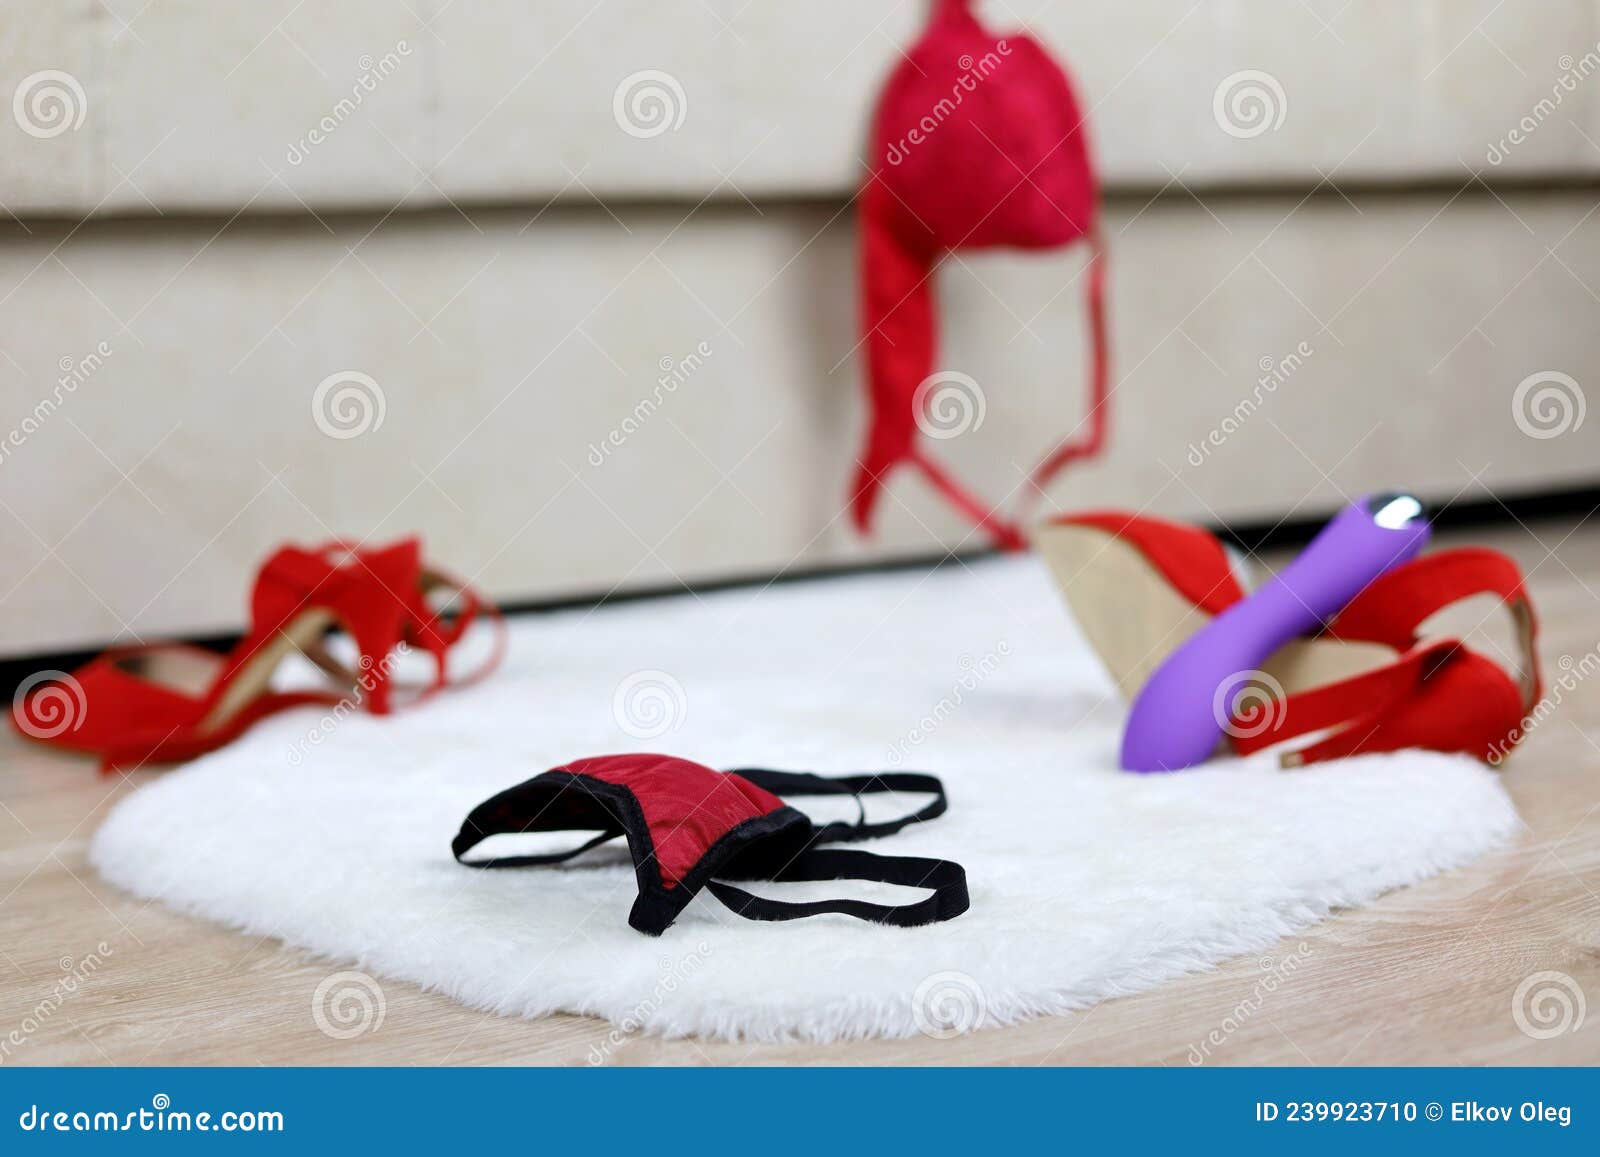 Female Thong Panties, Removed Red Bra and Shoes on a Floor Near Sofa Stock Photo